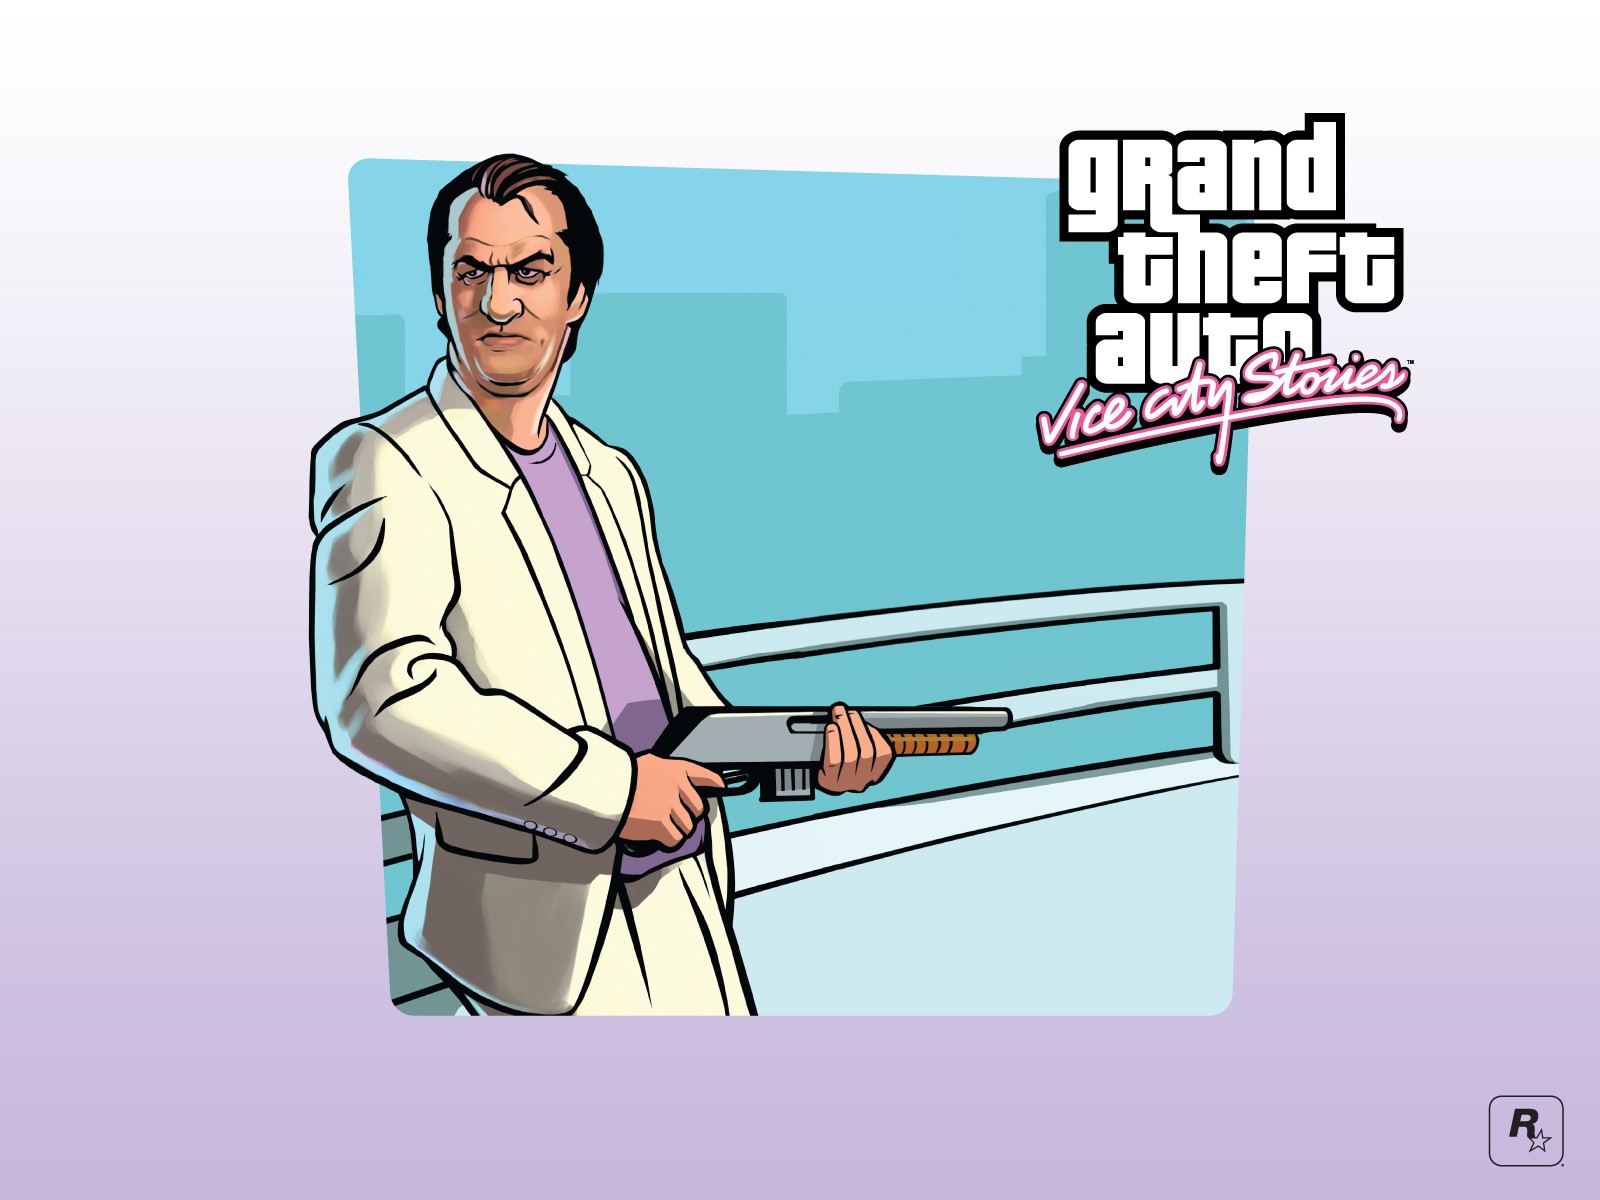 video, Games, Grand, Theft, Auto, Grand, Theft, Auto, Vice, City, Stories Wallpaper